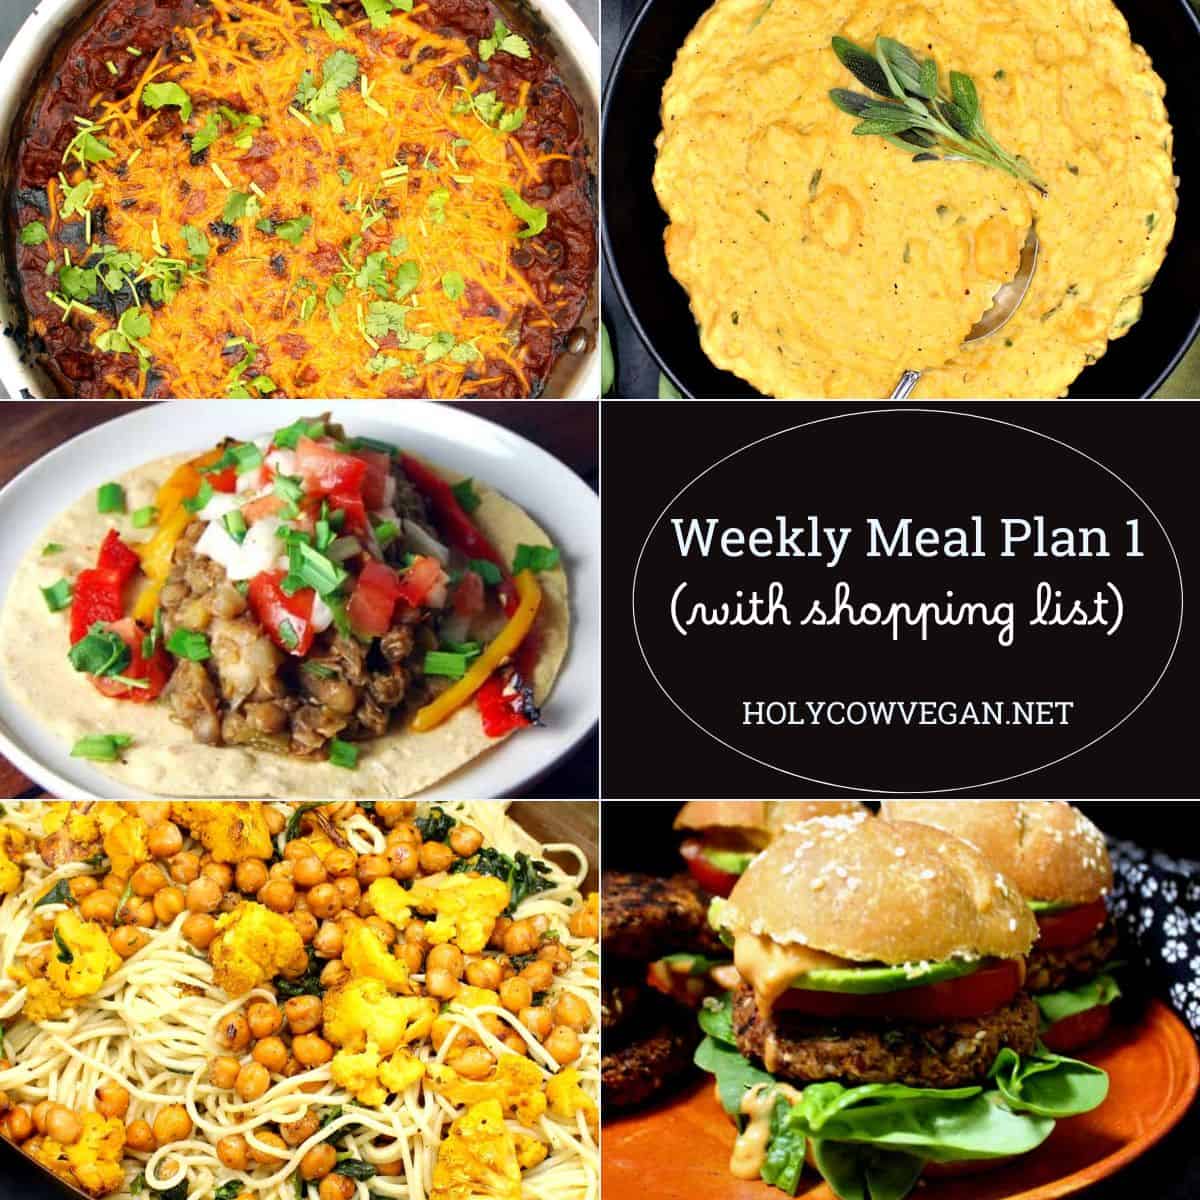 Holy cow vegan weekly meal plan 1 graphic with text that says "weekly meal plan 1 with shopping list."